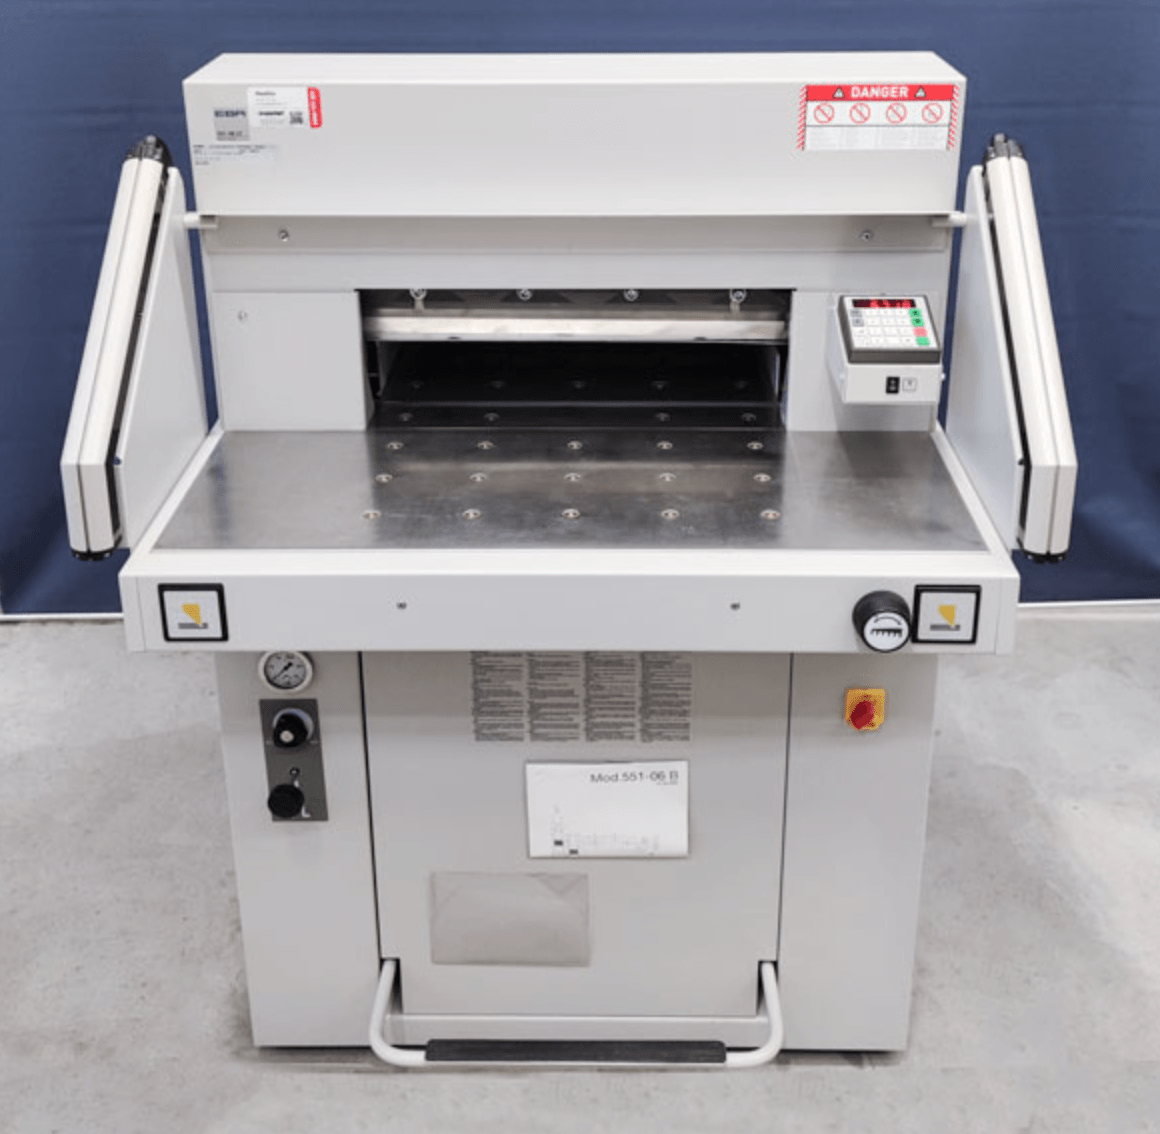 Absolute Toner $145/month Programmable Hydraulic Paper Cutter Guillotine EBA 551-06 w/ Photocell, Light cutting Beem and Foot Pedal Paper Cutters